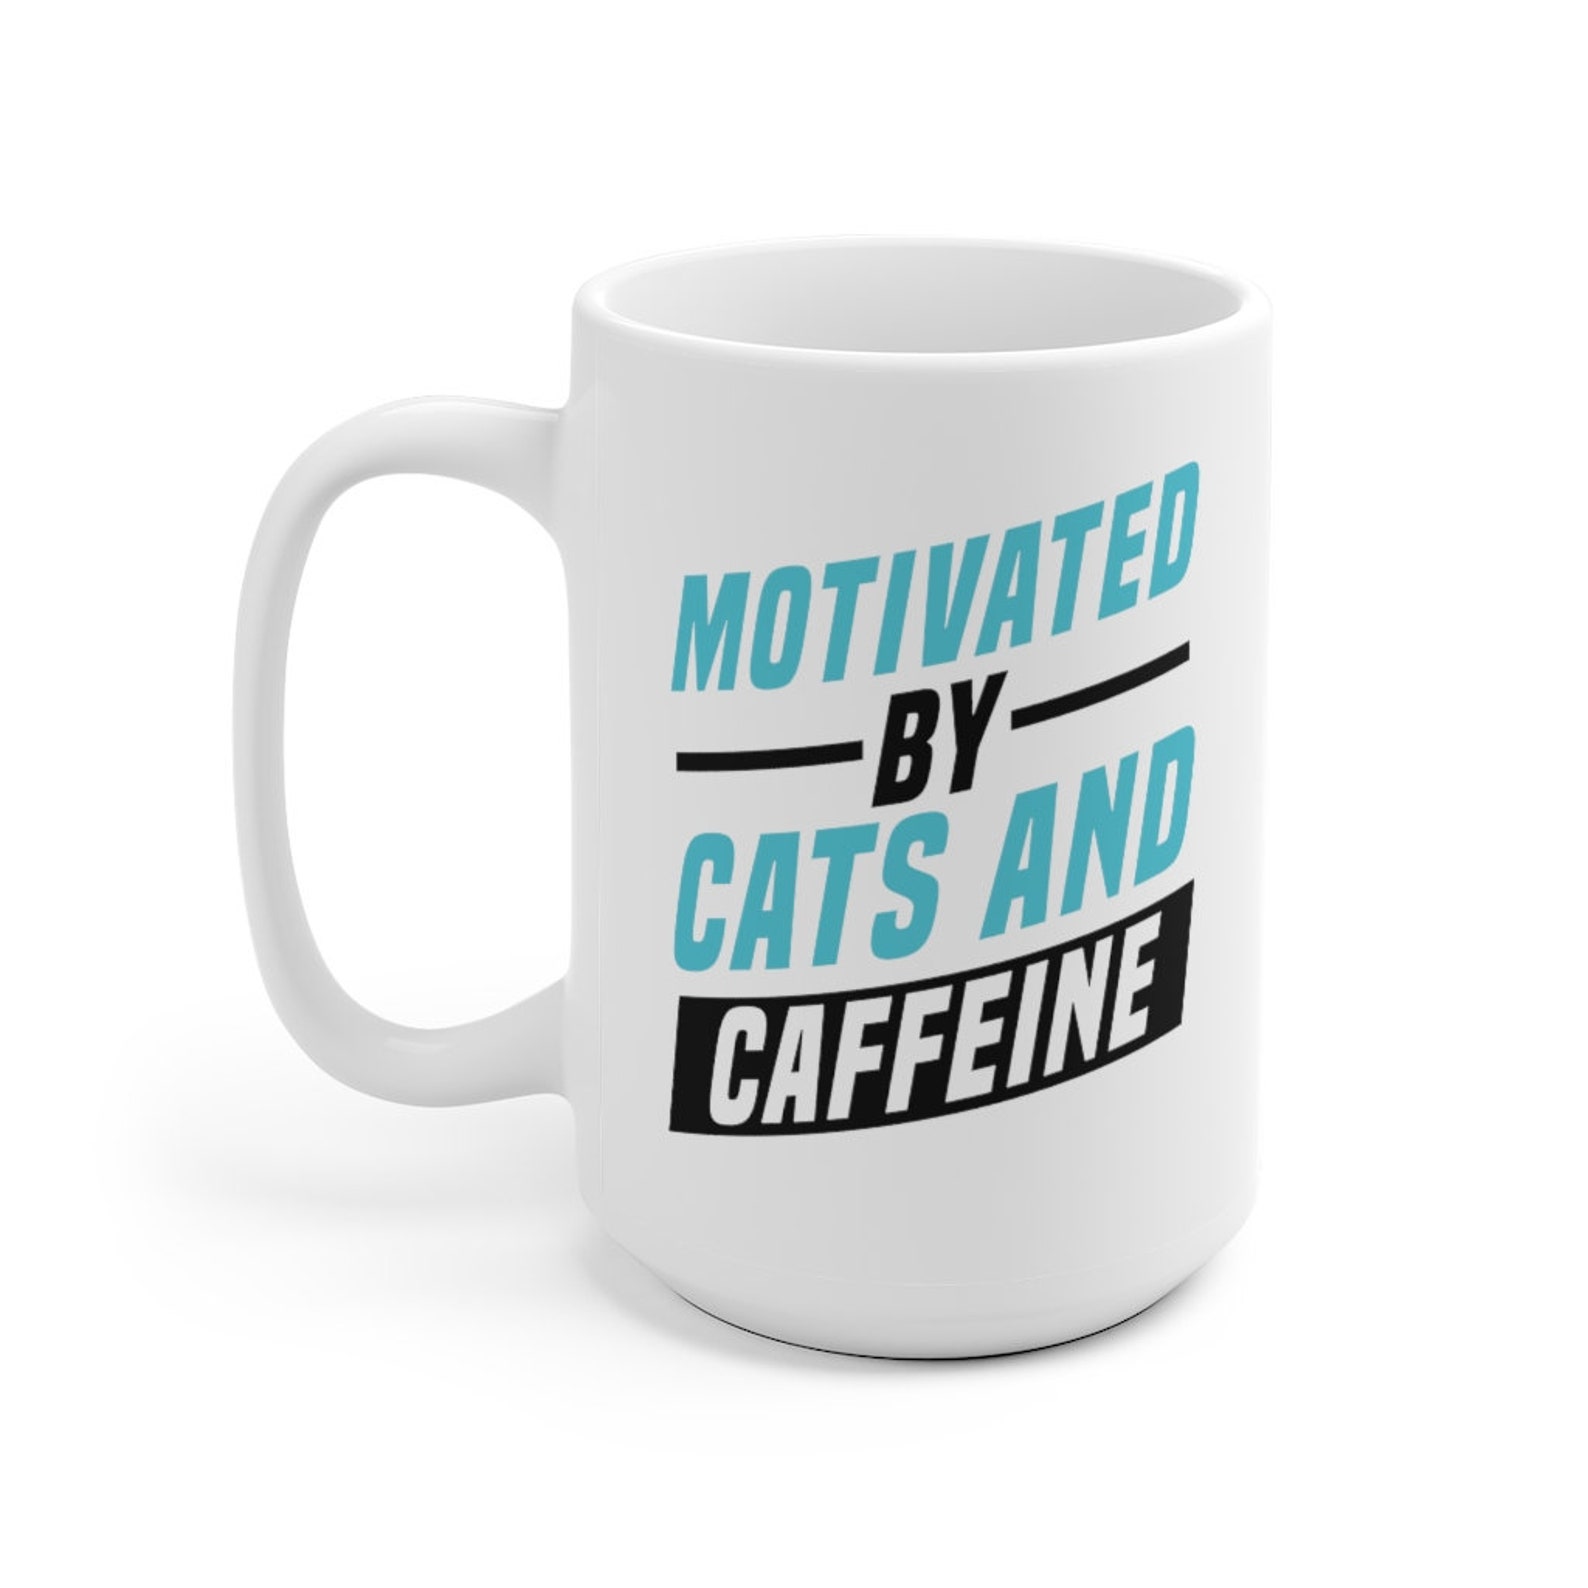 Motivated by Cats and Caffeine Mug Funny Cat Mug Gift for - Etsy